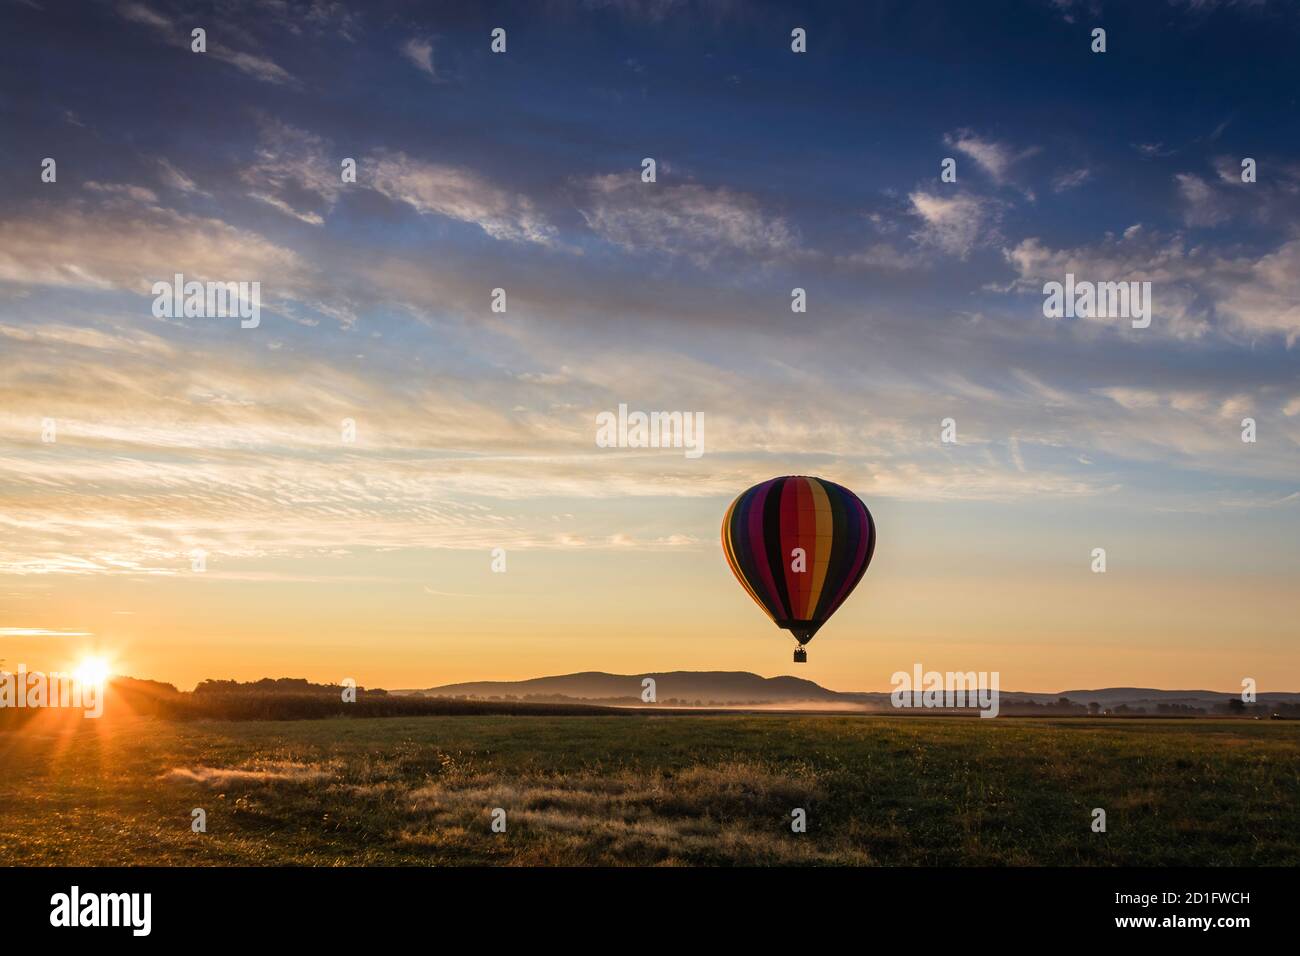 Hot Air Balloon in colorful rainbow stripes begins ascent over farm field as sun rises blue cloudy sky Stock Photo